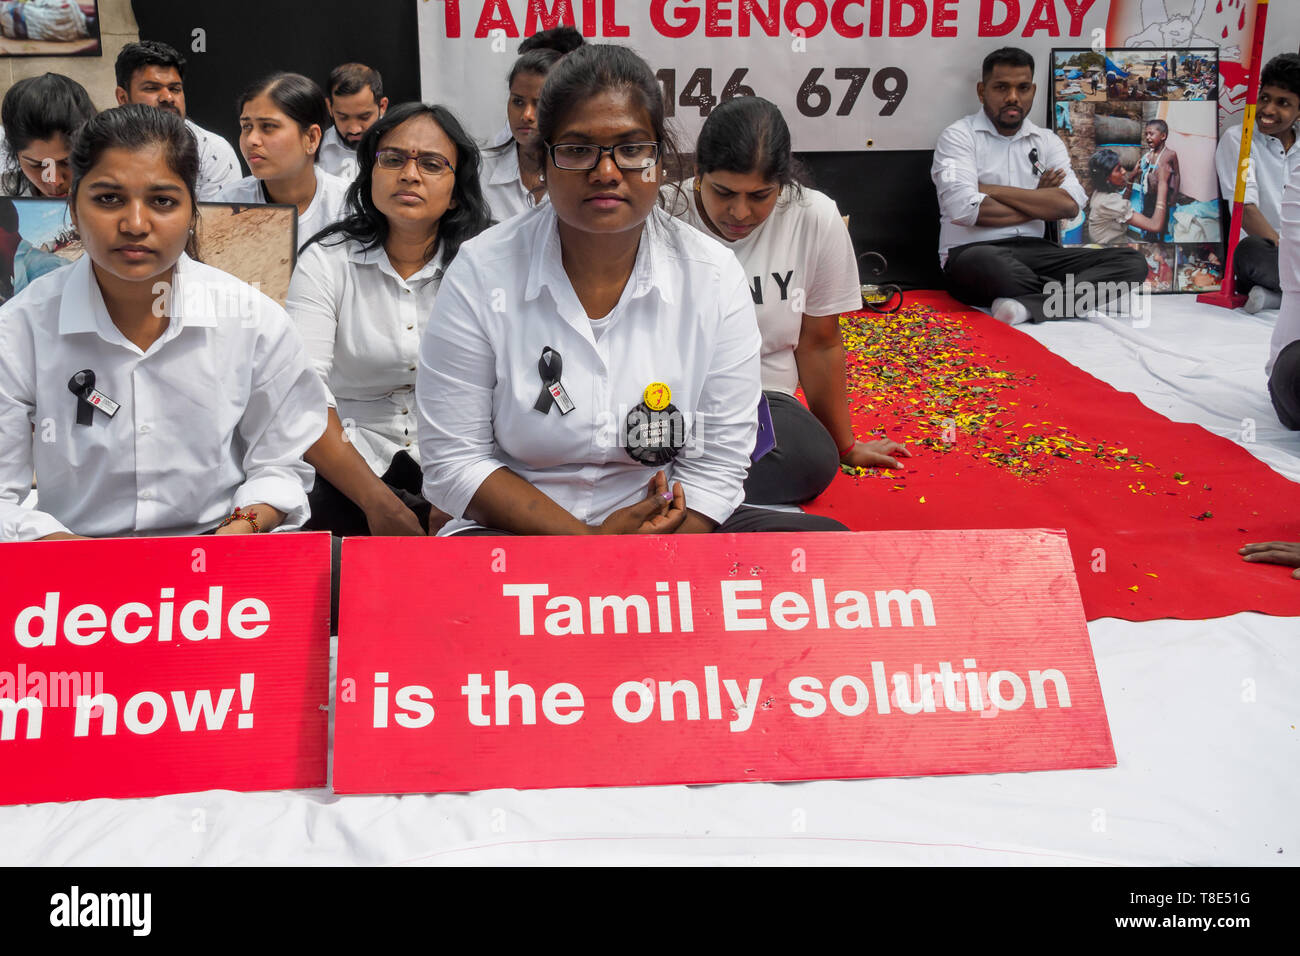 Genocide day 18 tamil may Ontario Bill